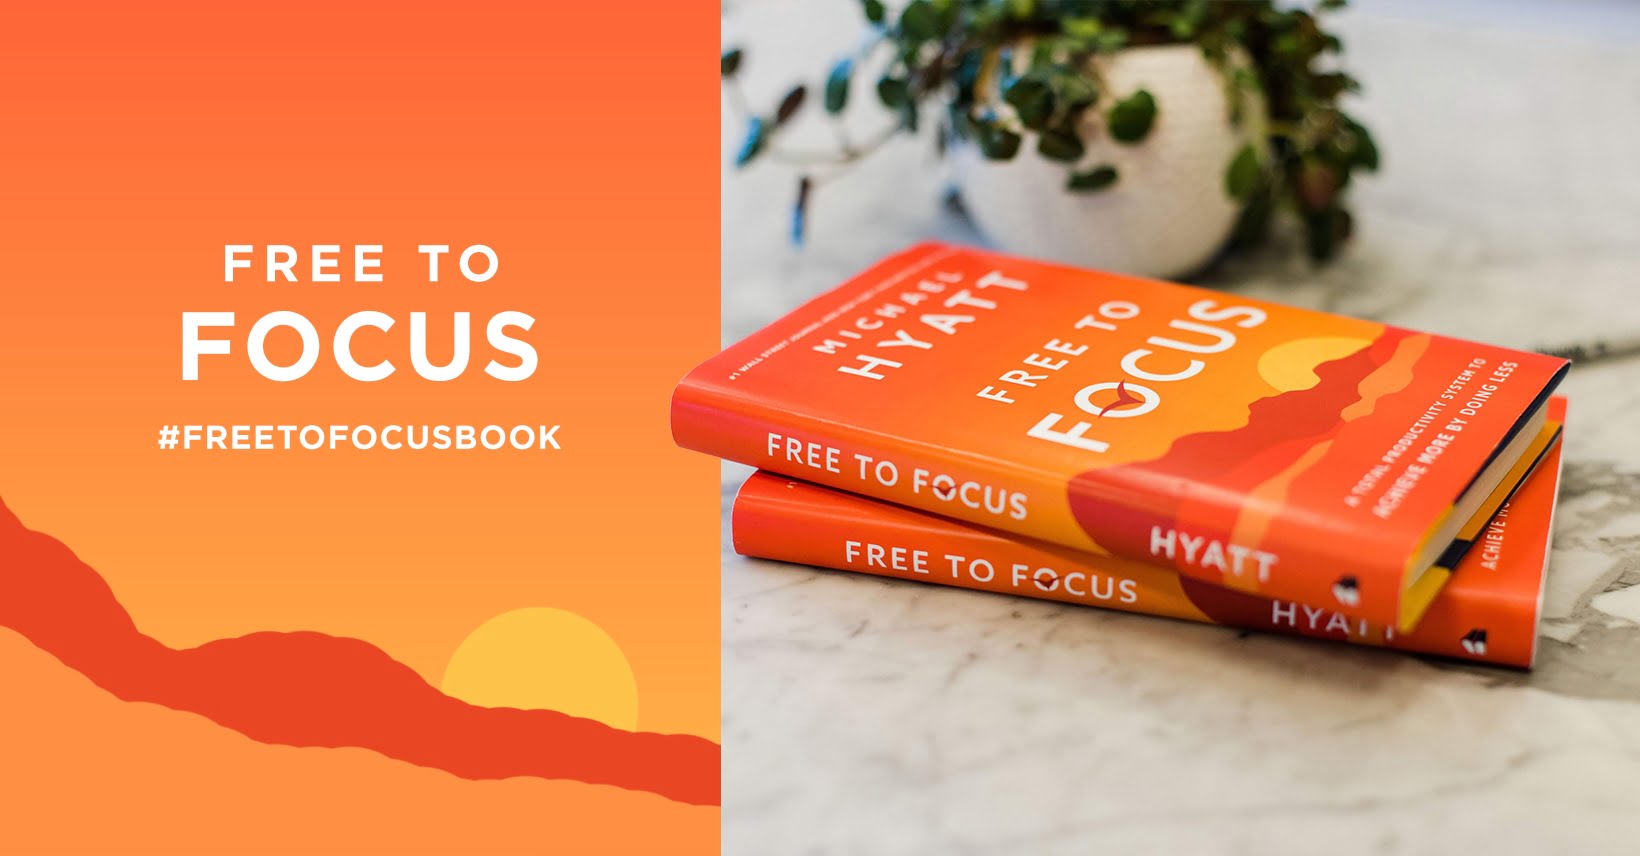 Image of "Free to Focus" books and the book hashtag #FreetoFocusBook